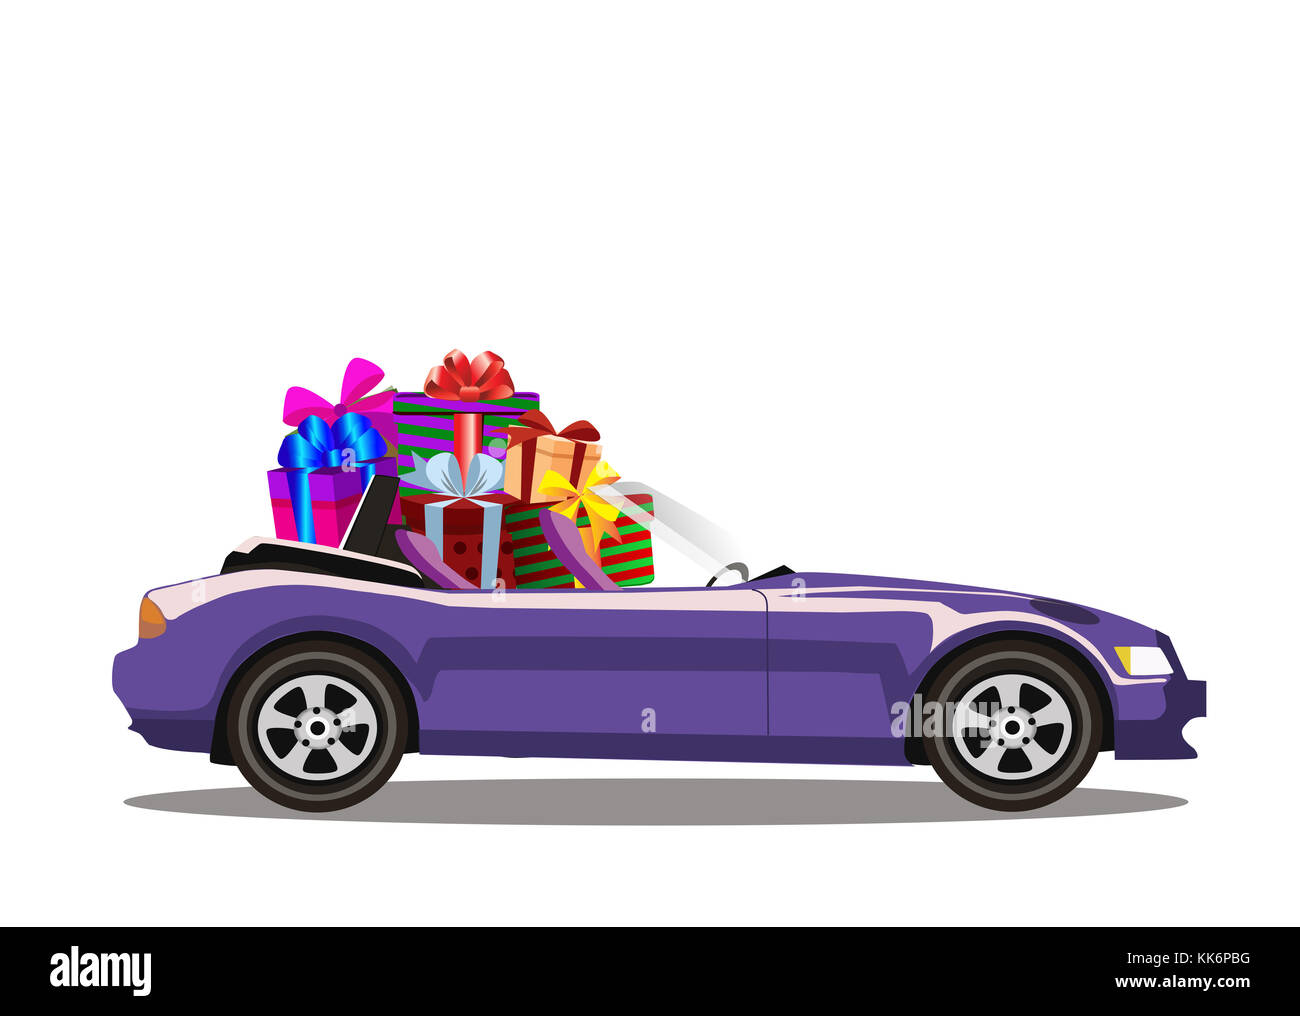 Violet modern cartoon cabriolet car full of gift boxes isolated on white background. Sports car. Vector illustration. Clip art. Stock Photo